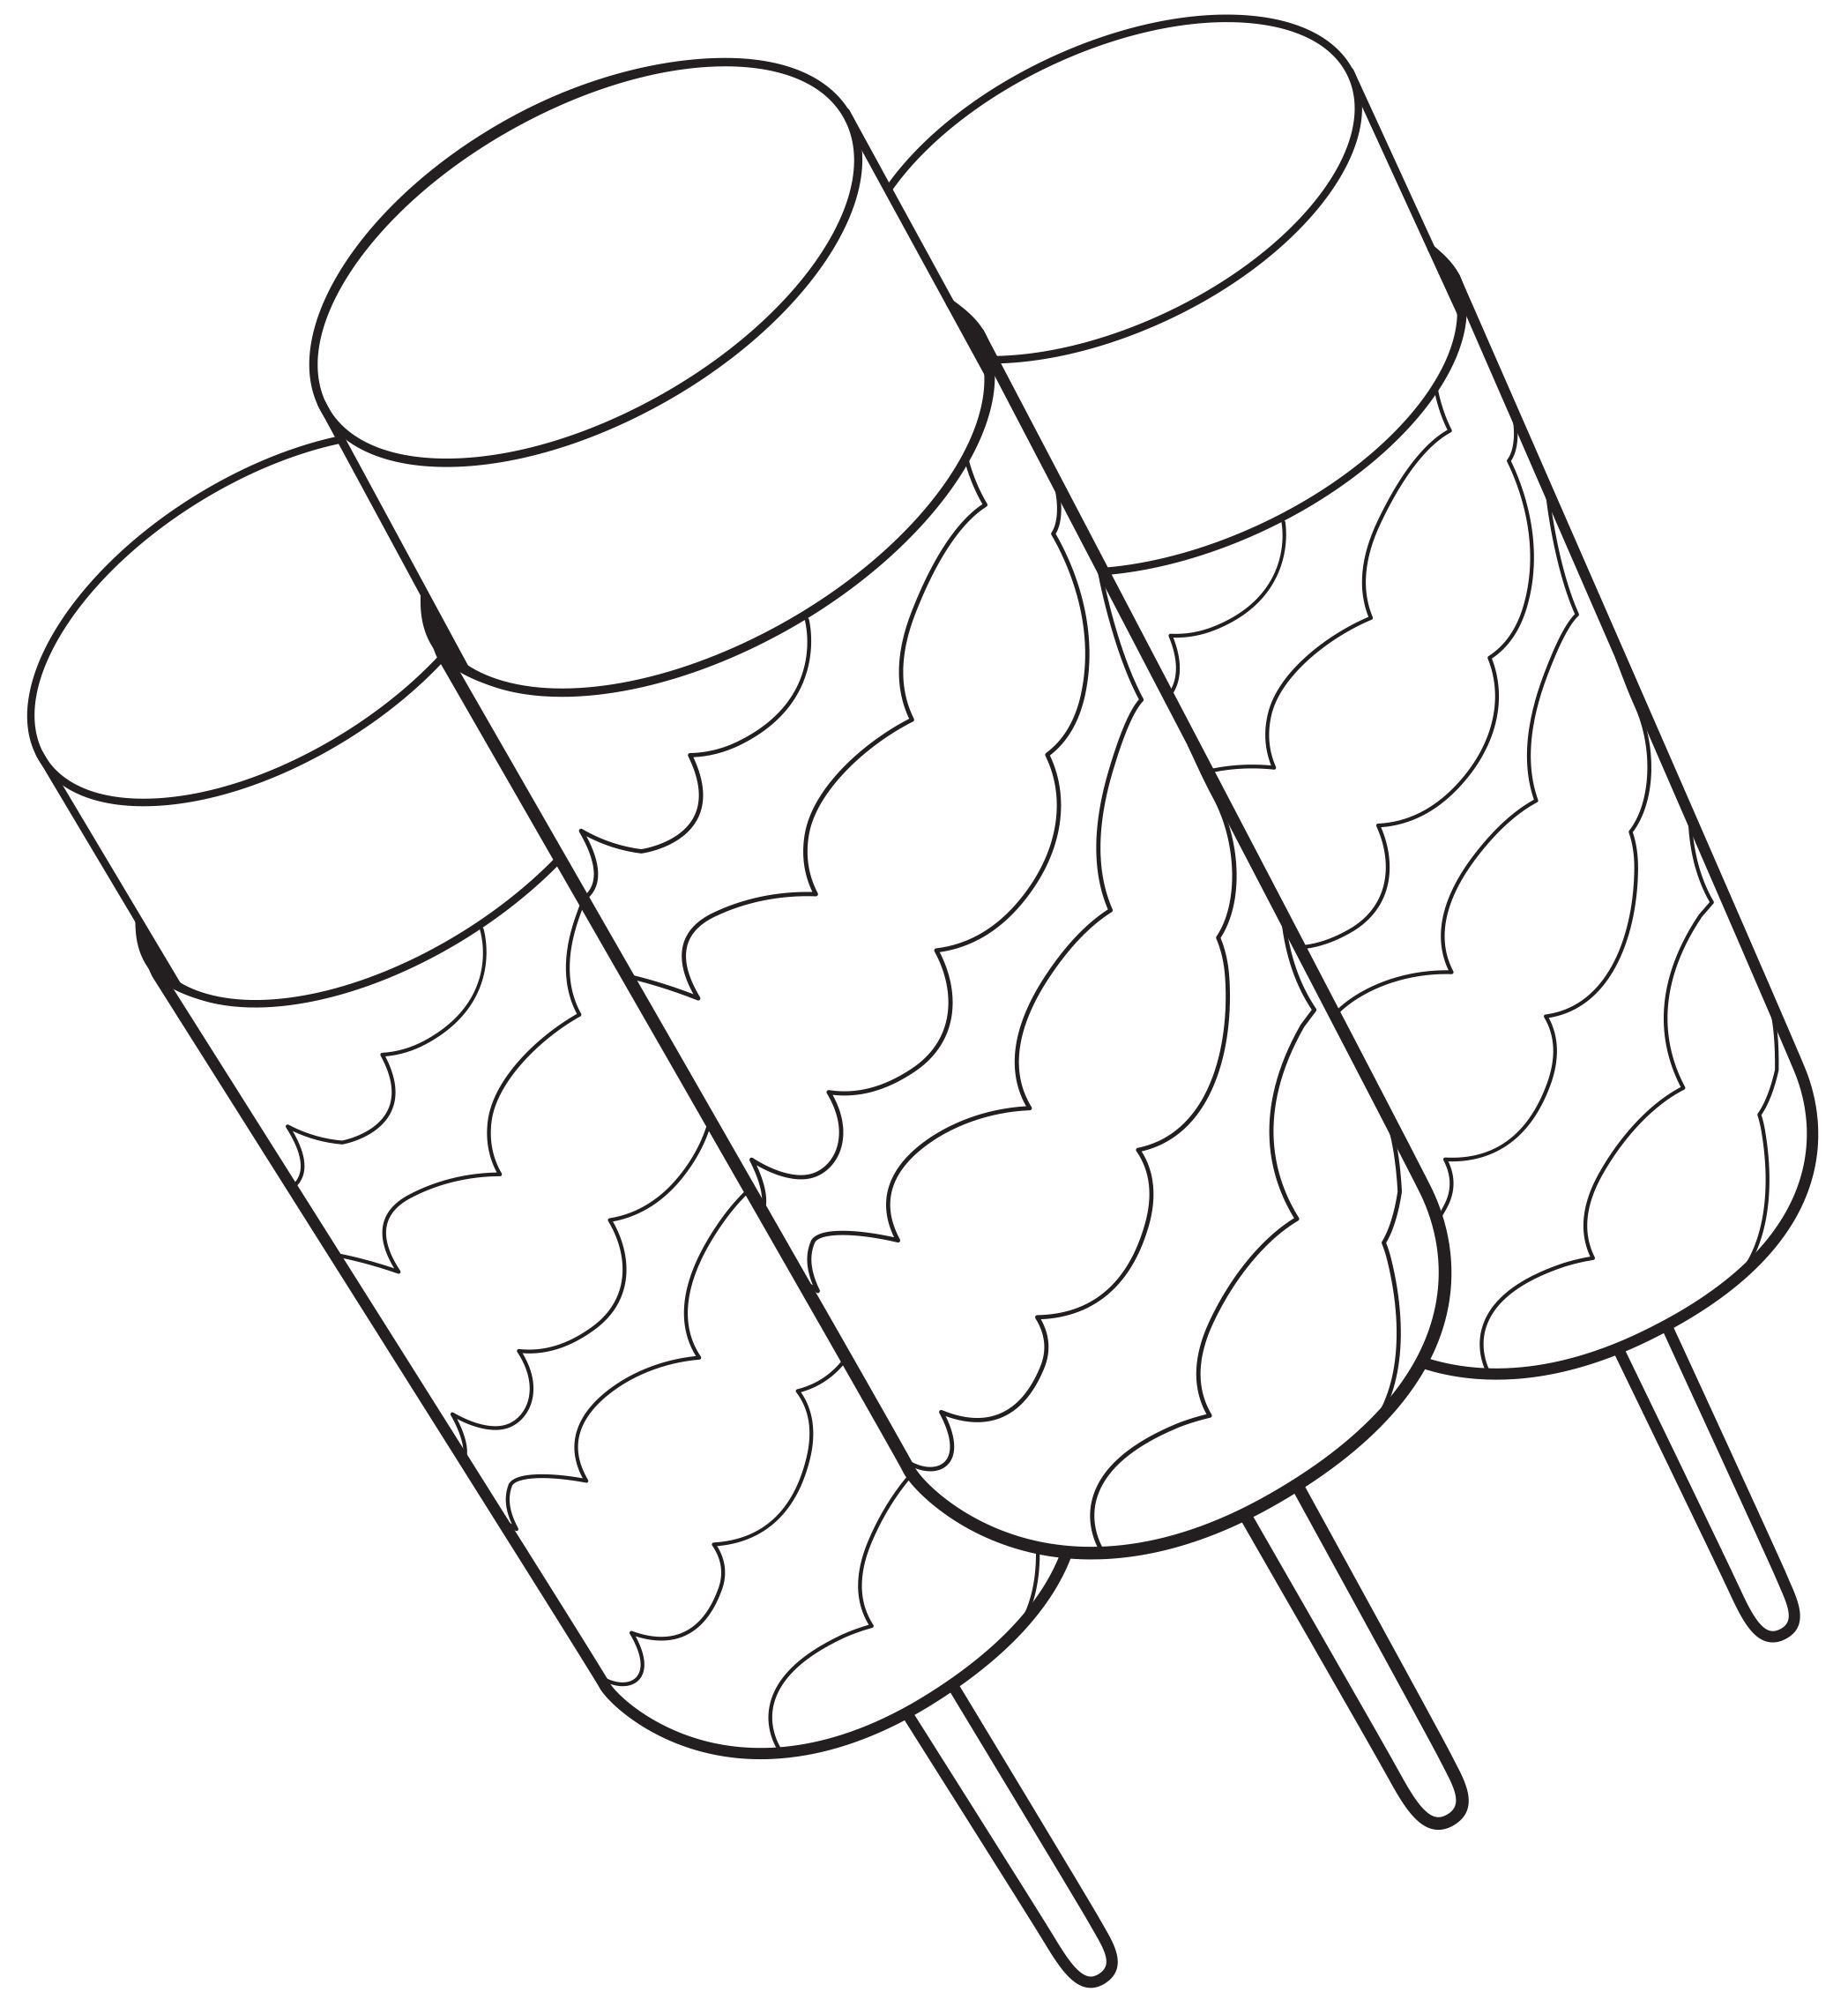 Popsicle Coloring Page at Free printable colorings